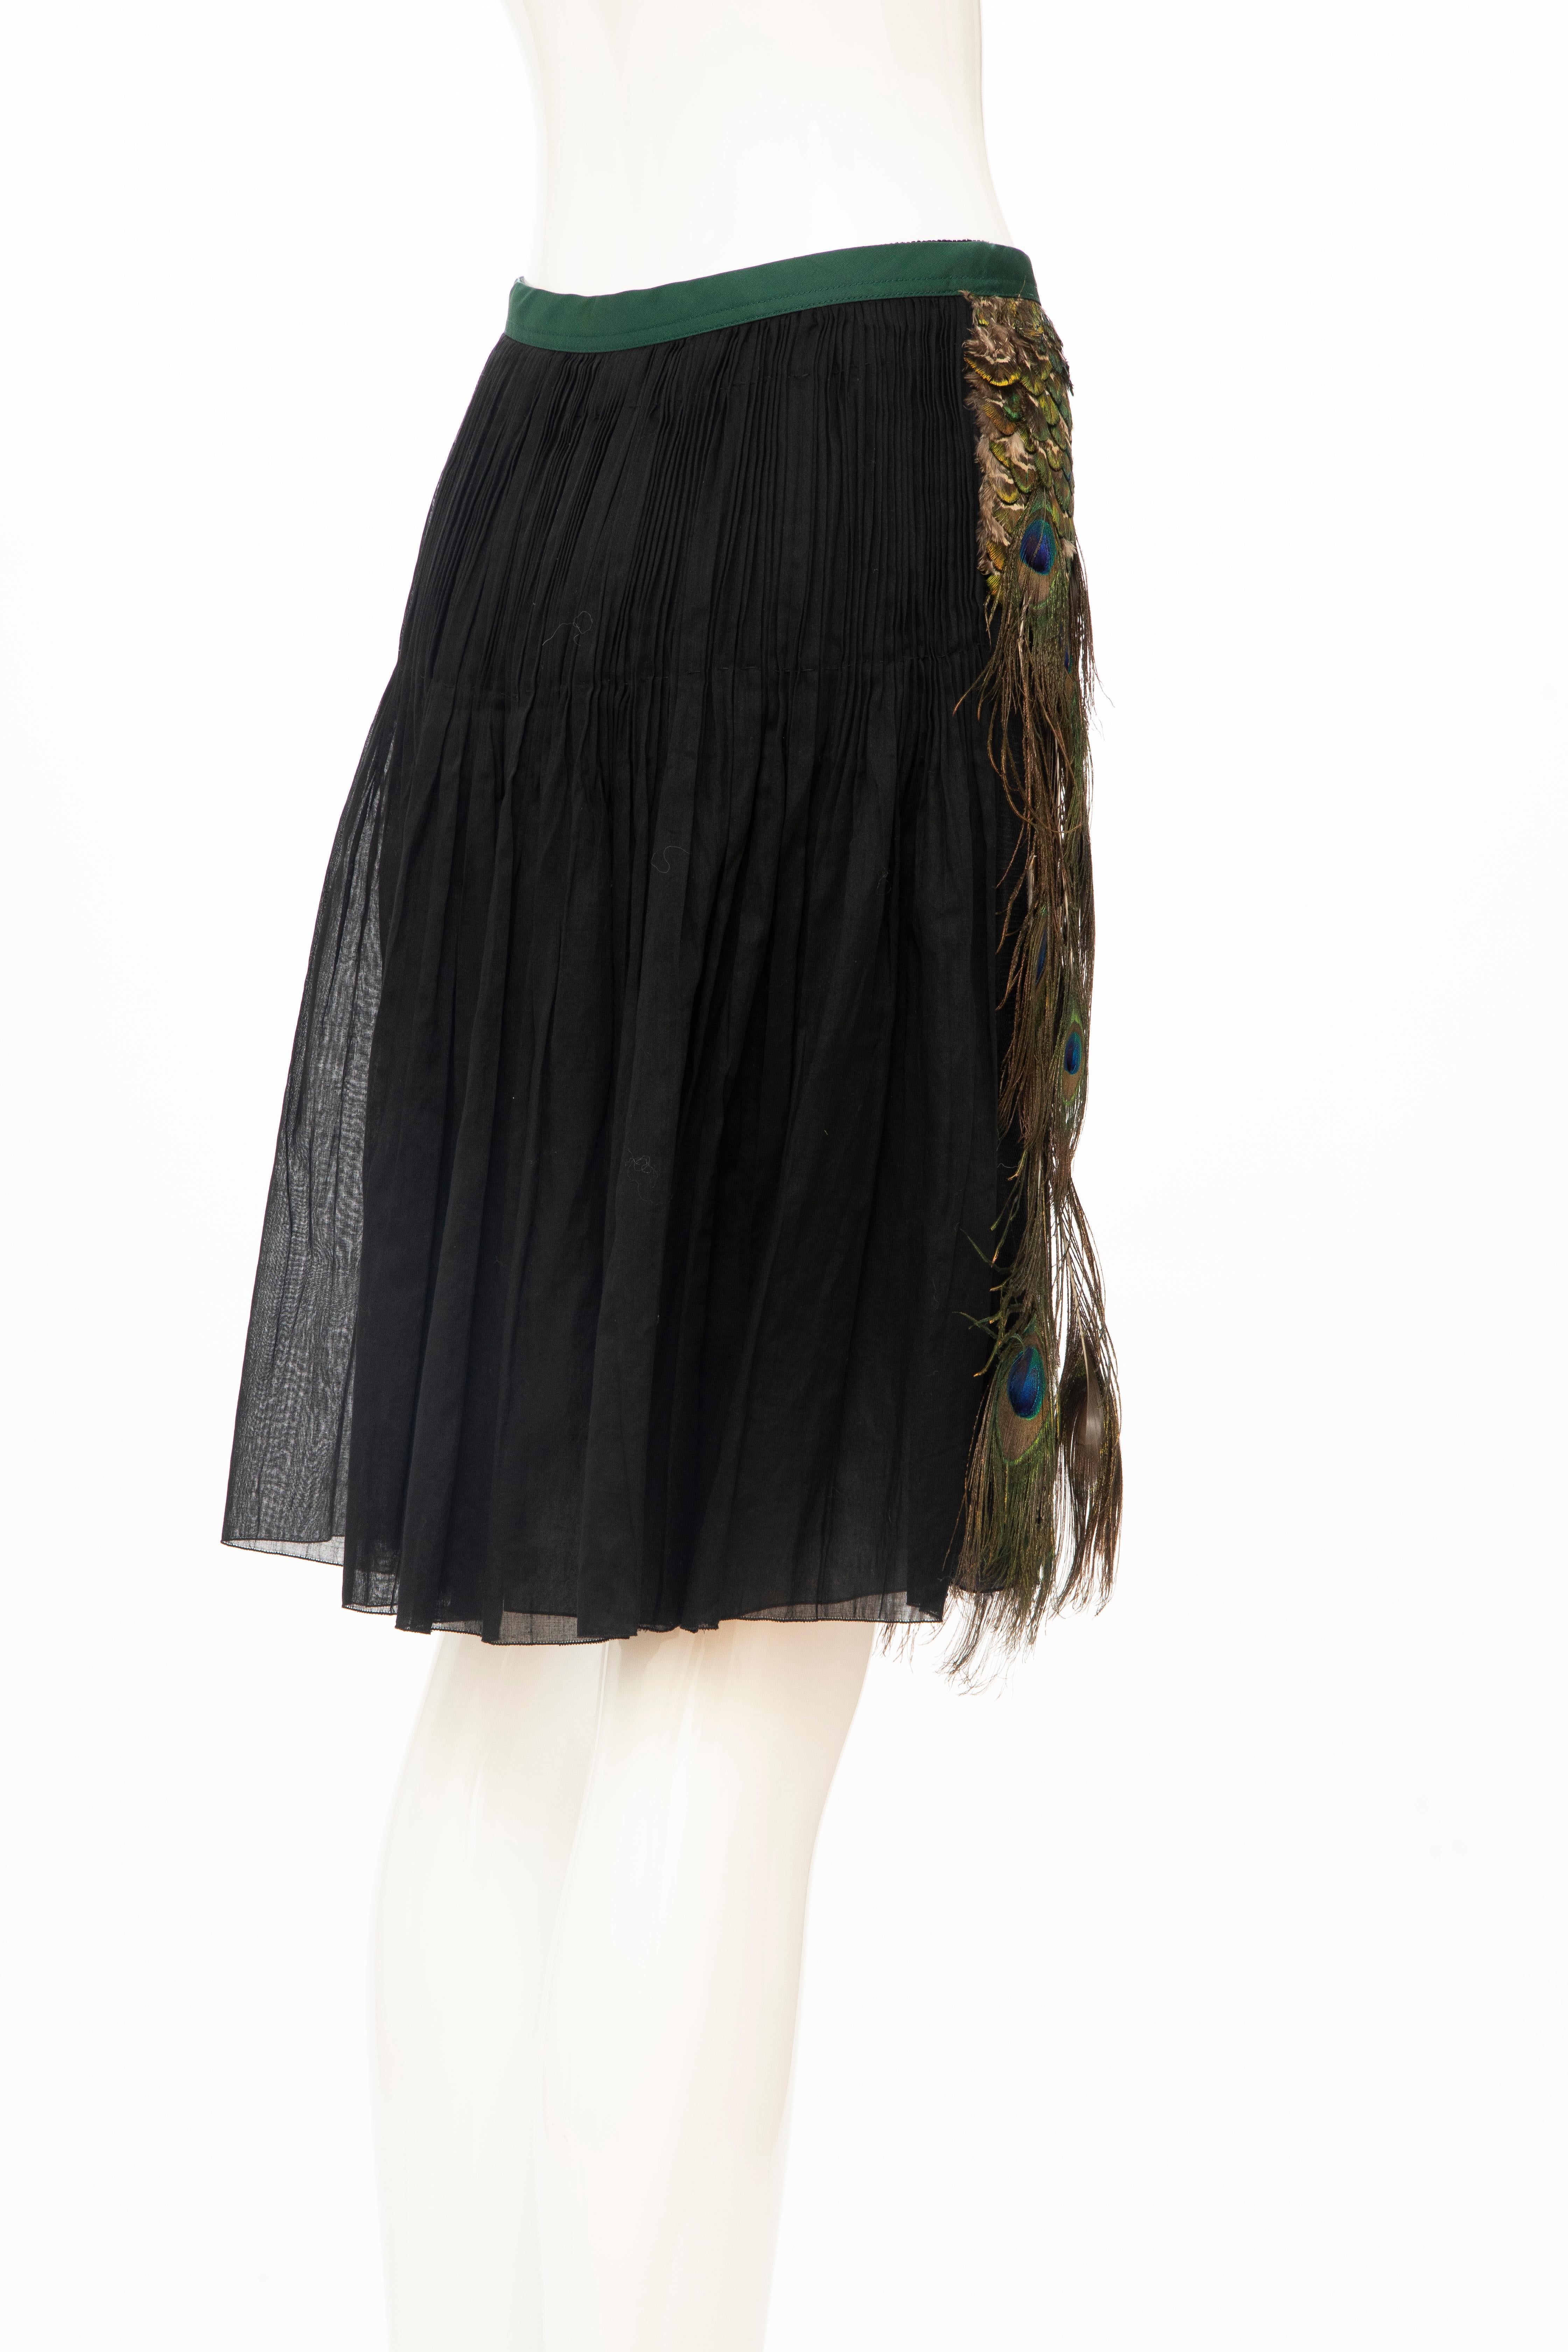 Prada Runway Black Cotton Pleated Skirt Appliquéd Peacock Feathers, Spring 2005 In Good Condition For Sale In Cincinnati, OH